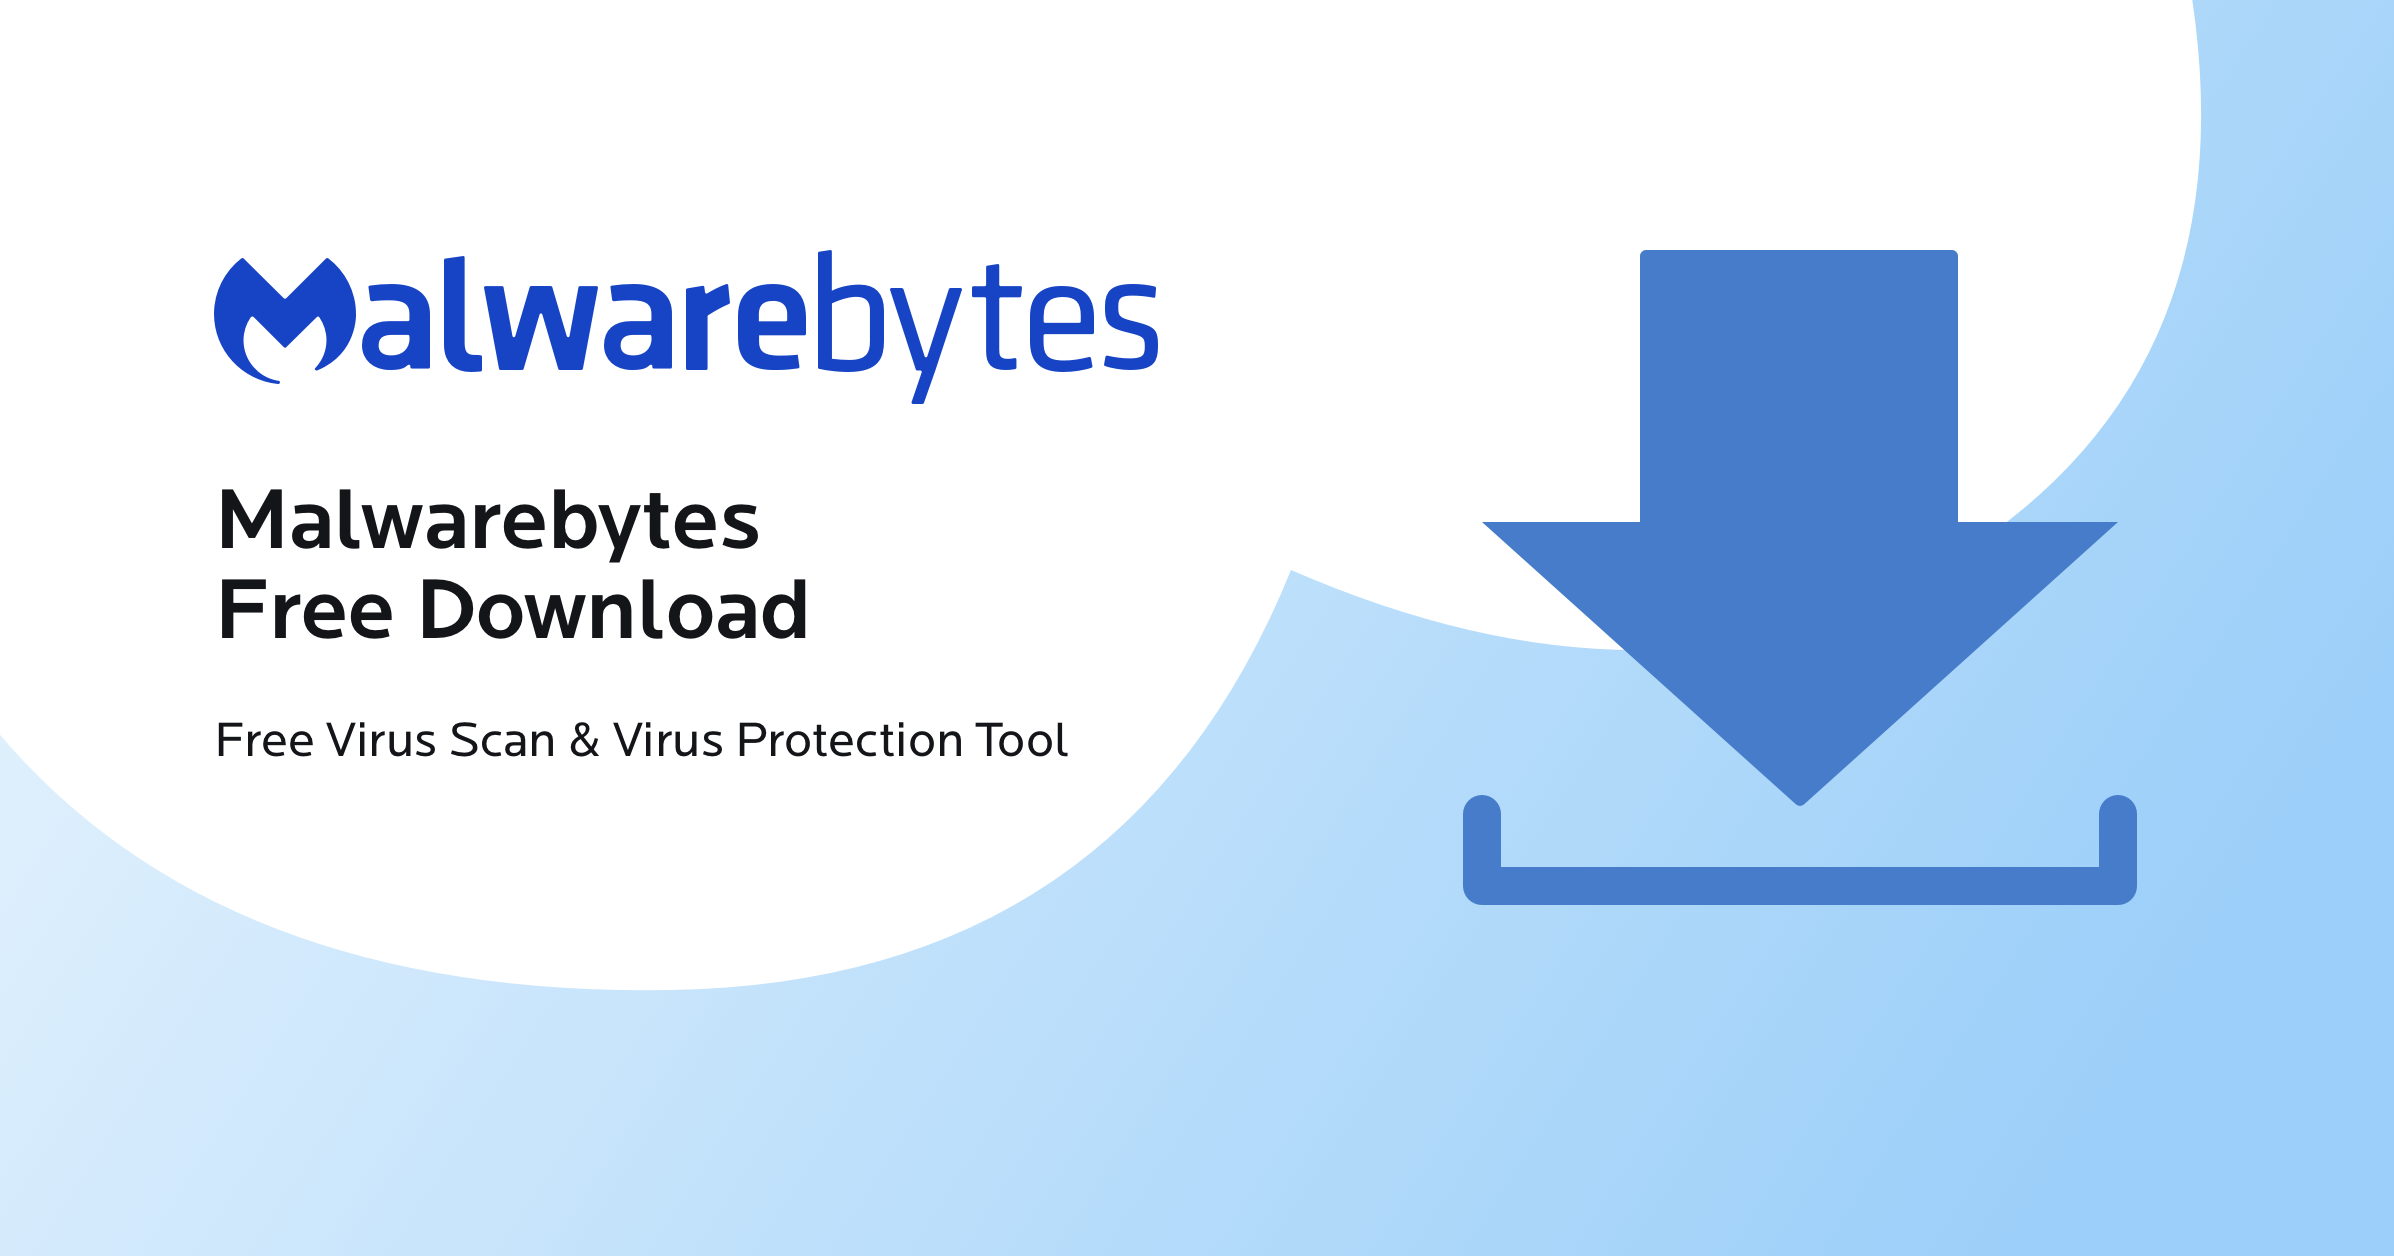 Download a trusted anti-malware program
Install the program on your computer